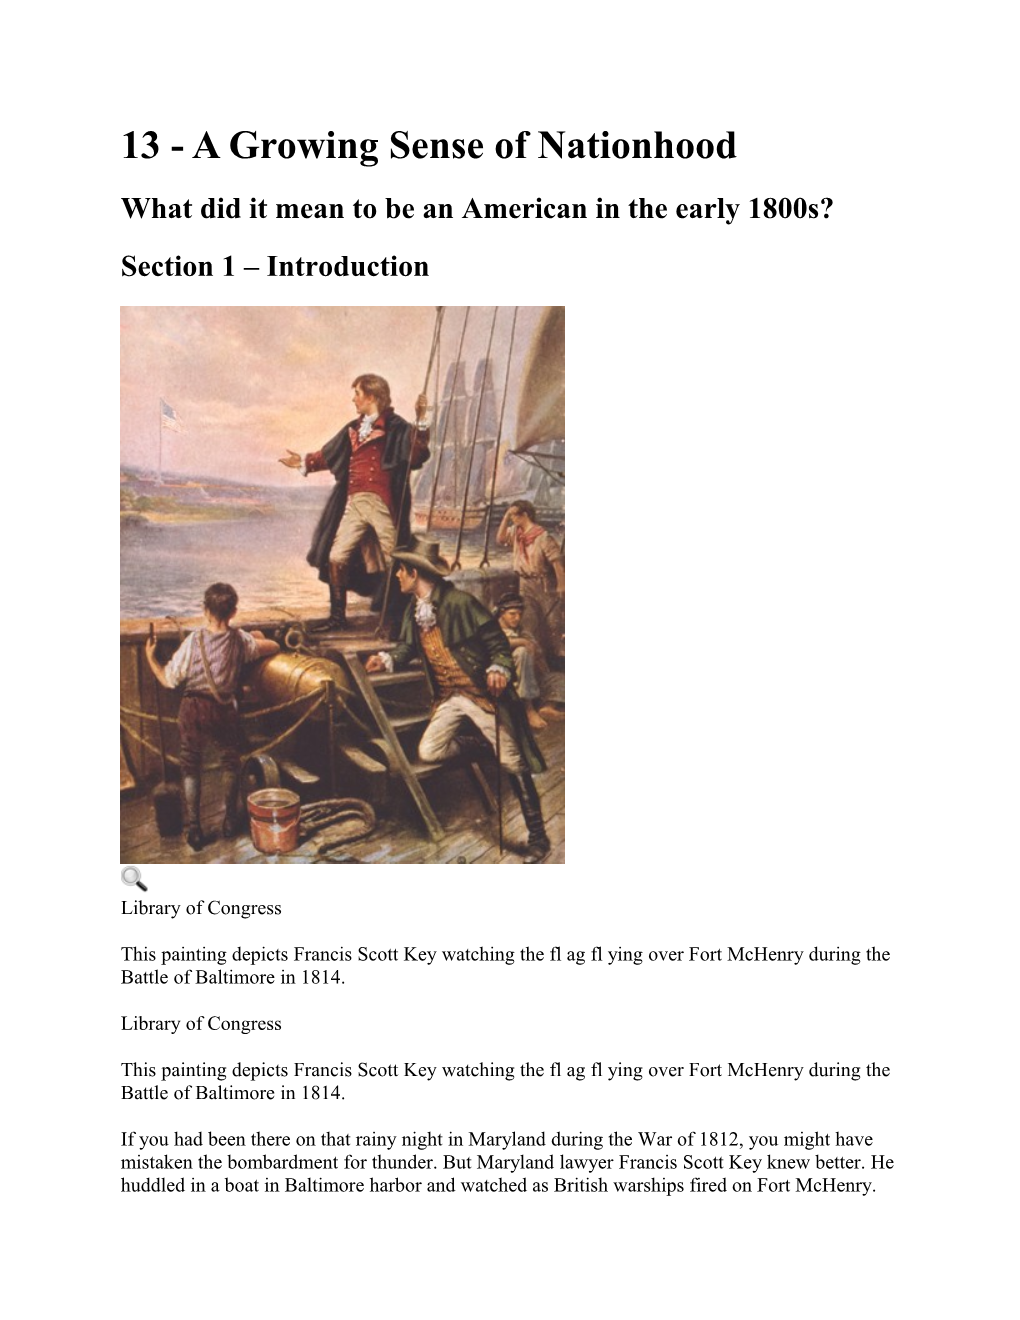 What Did It Mean to Be an American in the Early 1800S?